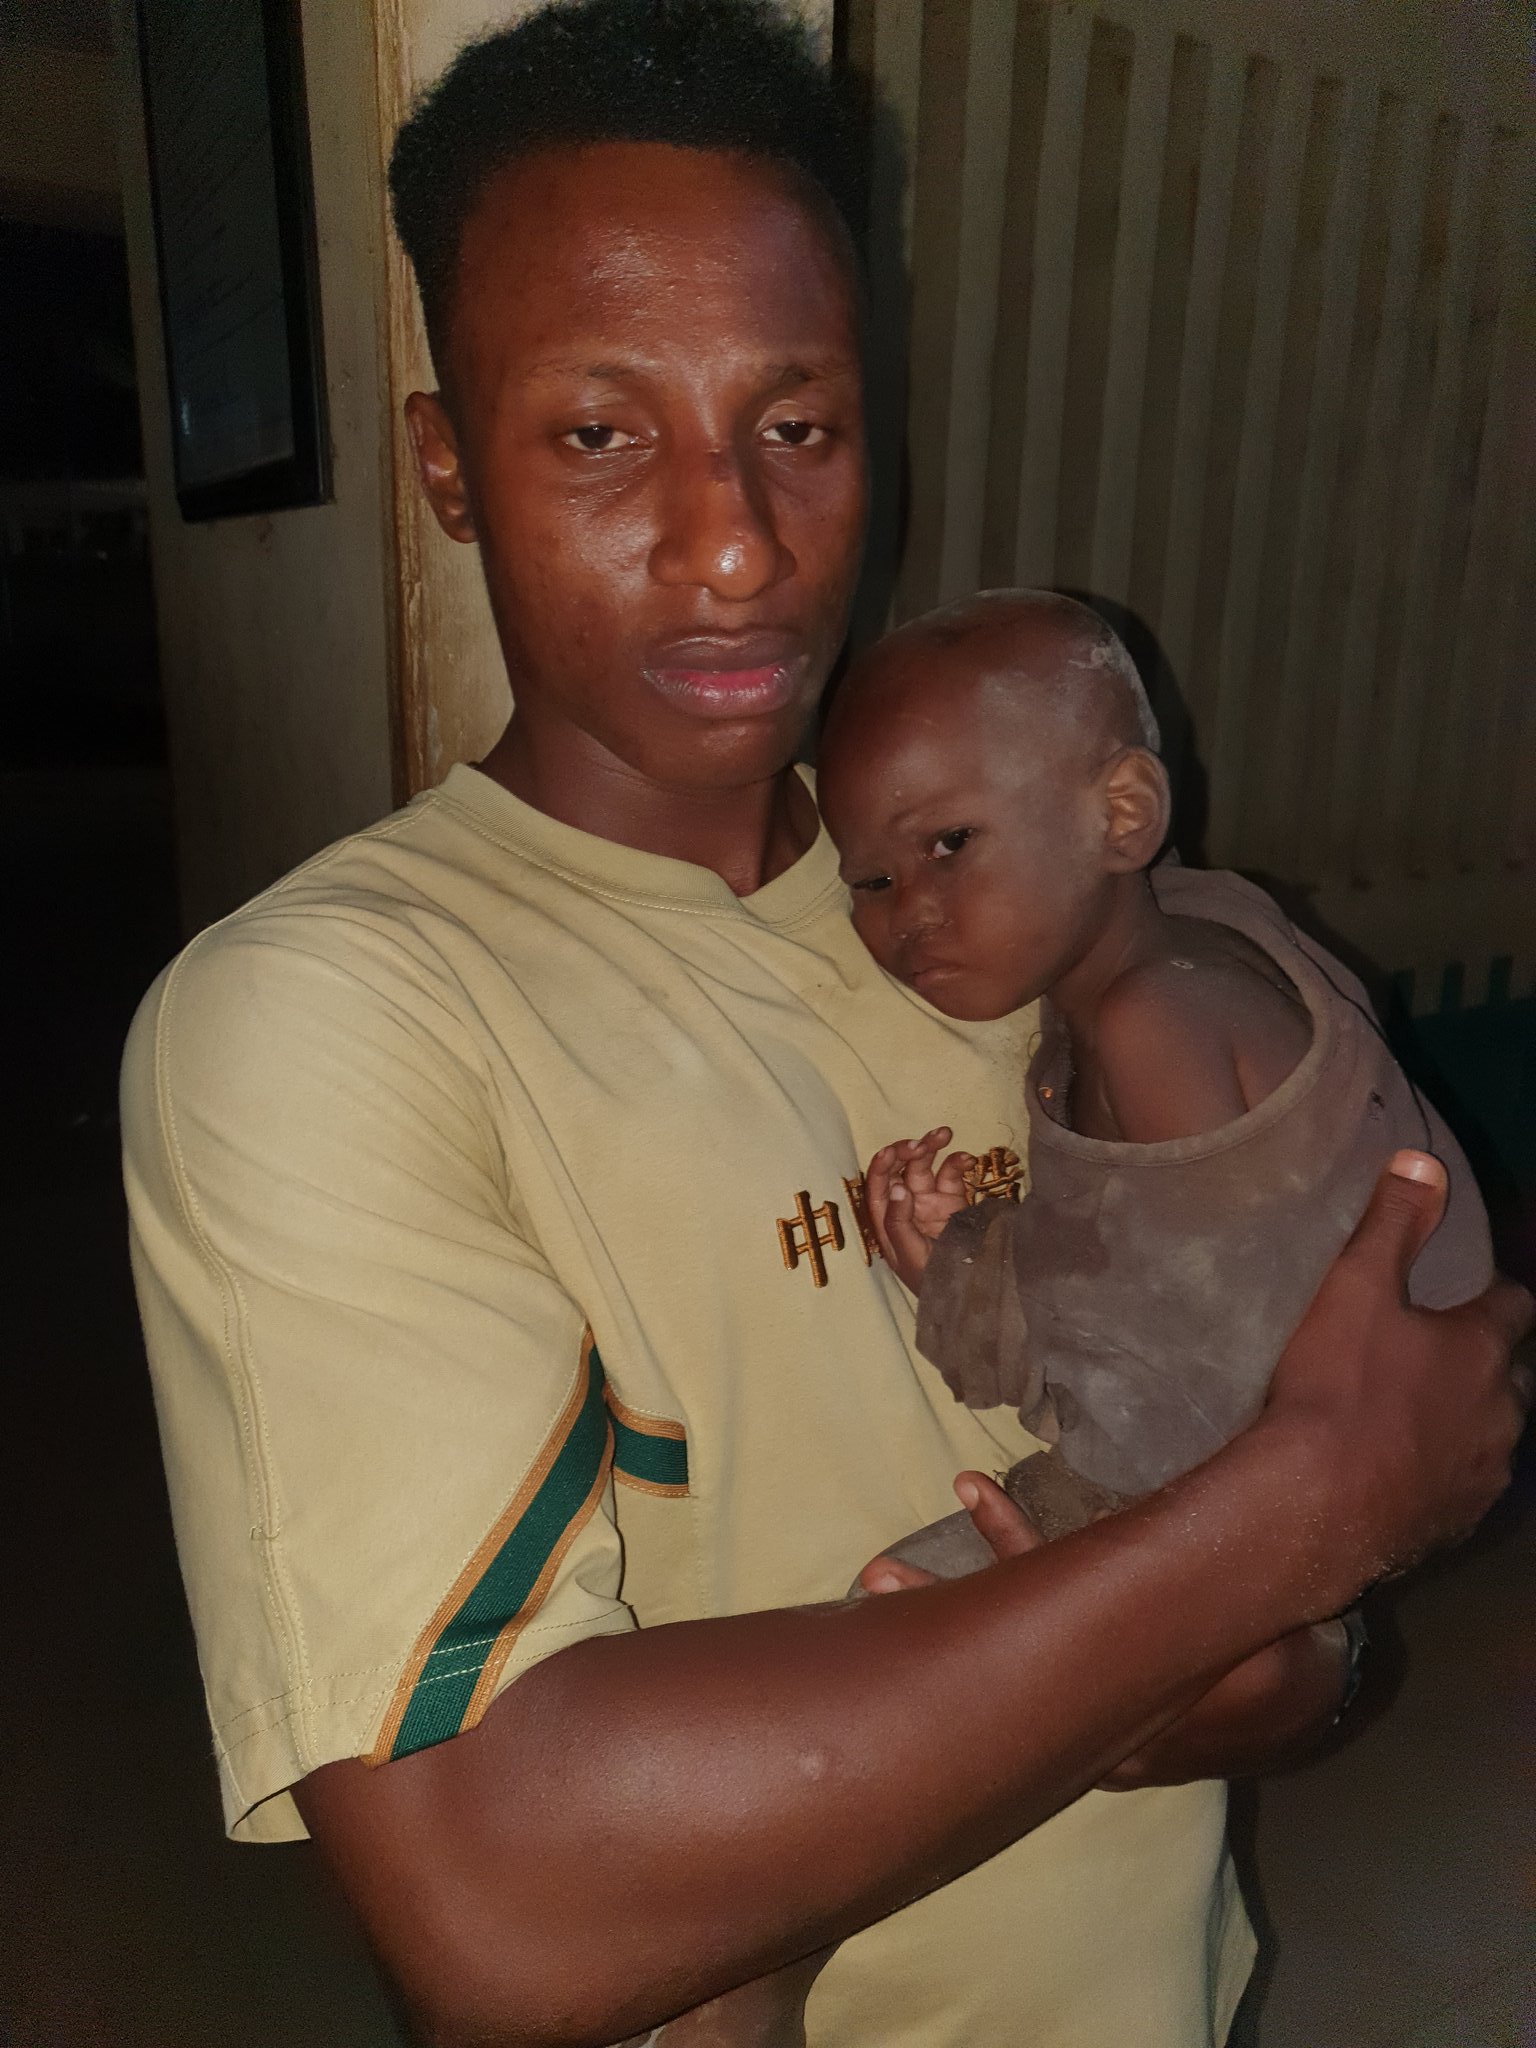 Man shares transformation of little girl rescued after being abandoned by mentally challenged mother [photos]